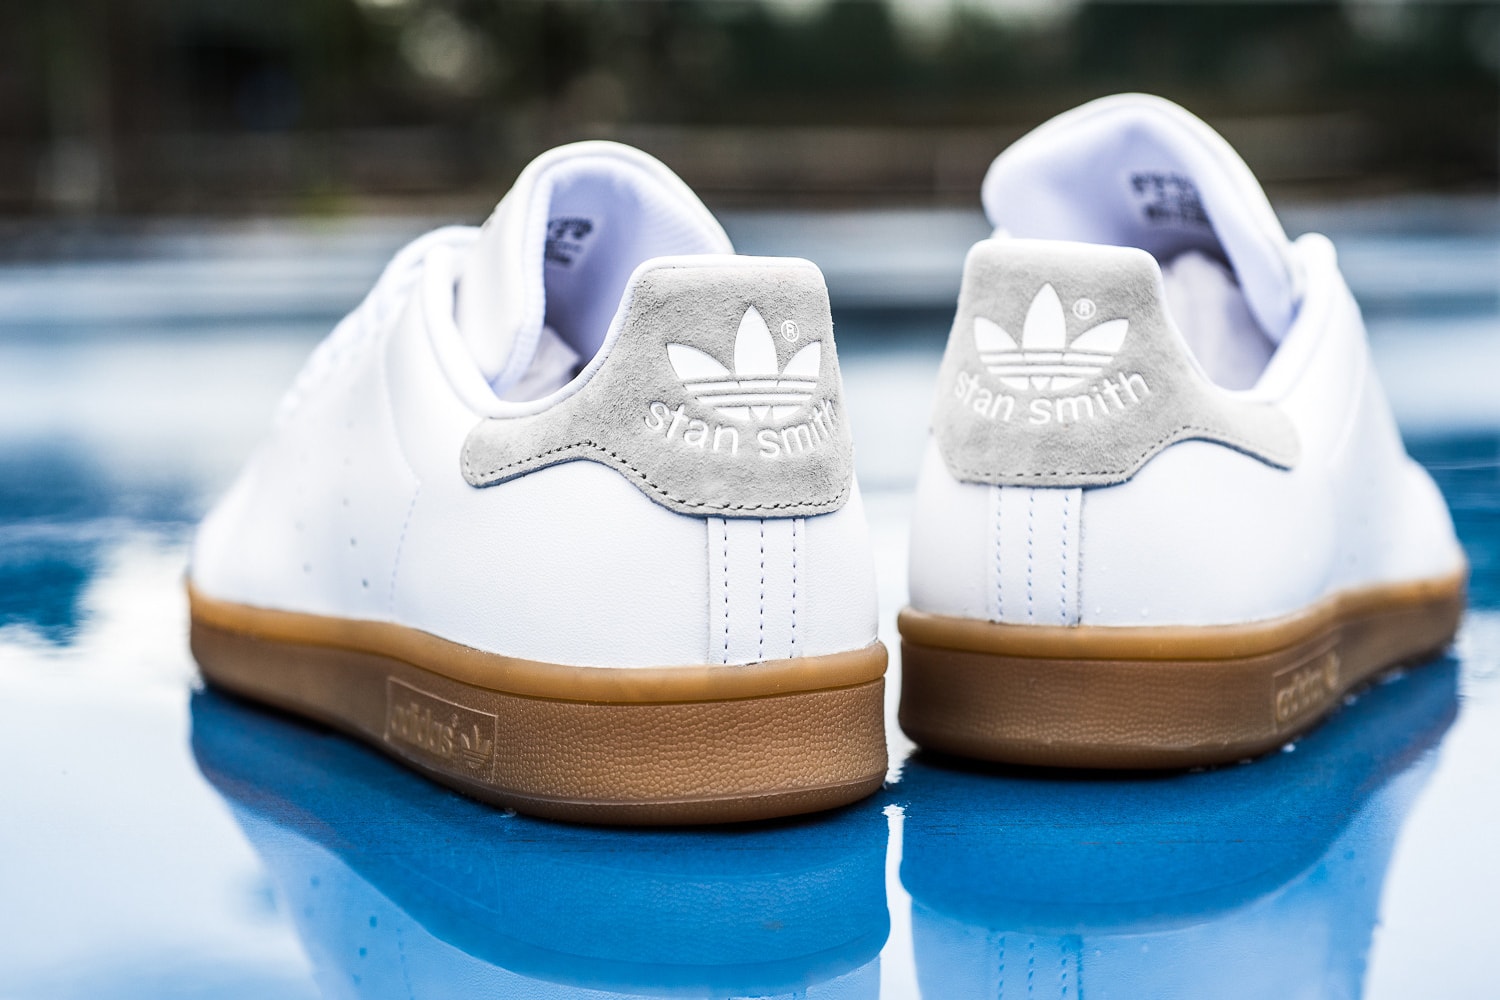 adidas Originals Stan Smith Sneakers In Off White With Gum Sole in